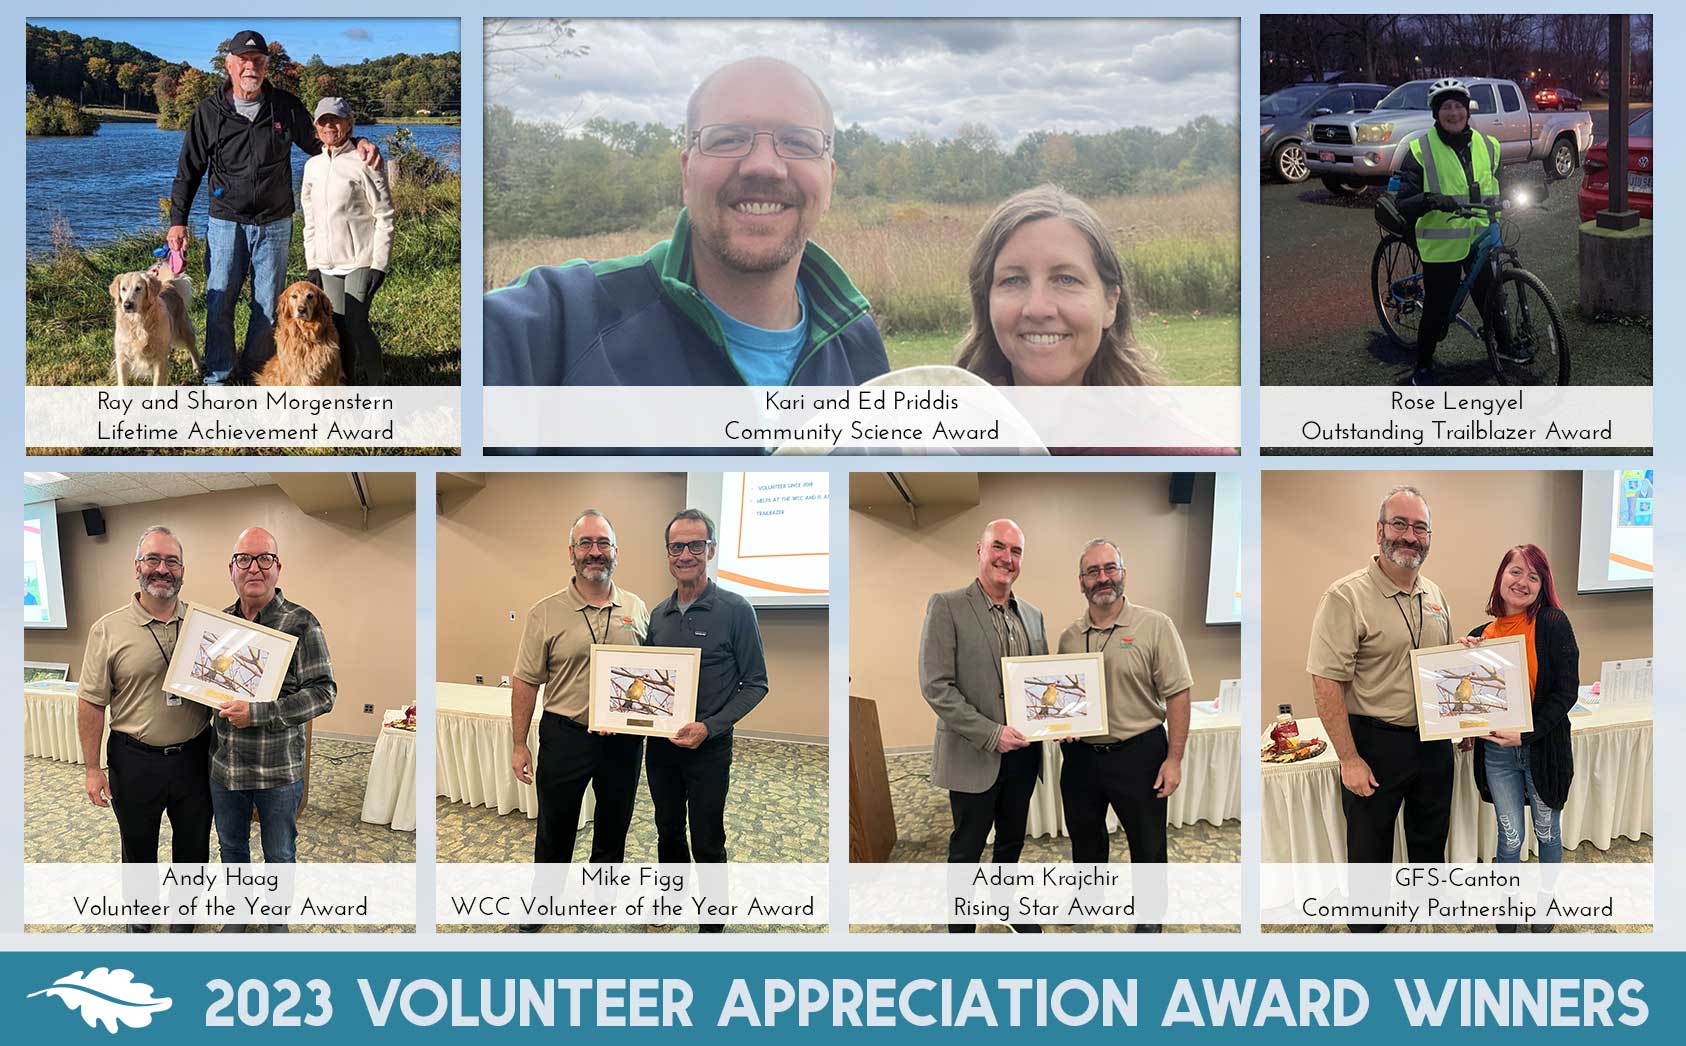 Volunteer pictures with awards or helping in parks